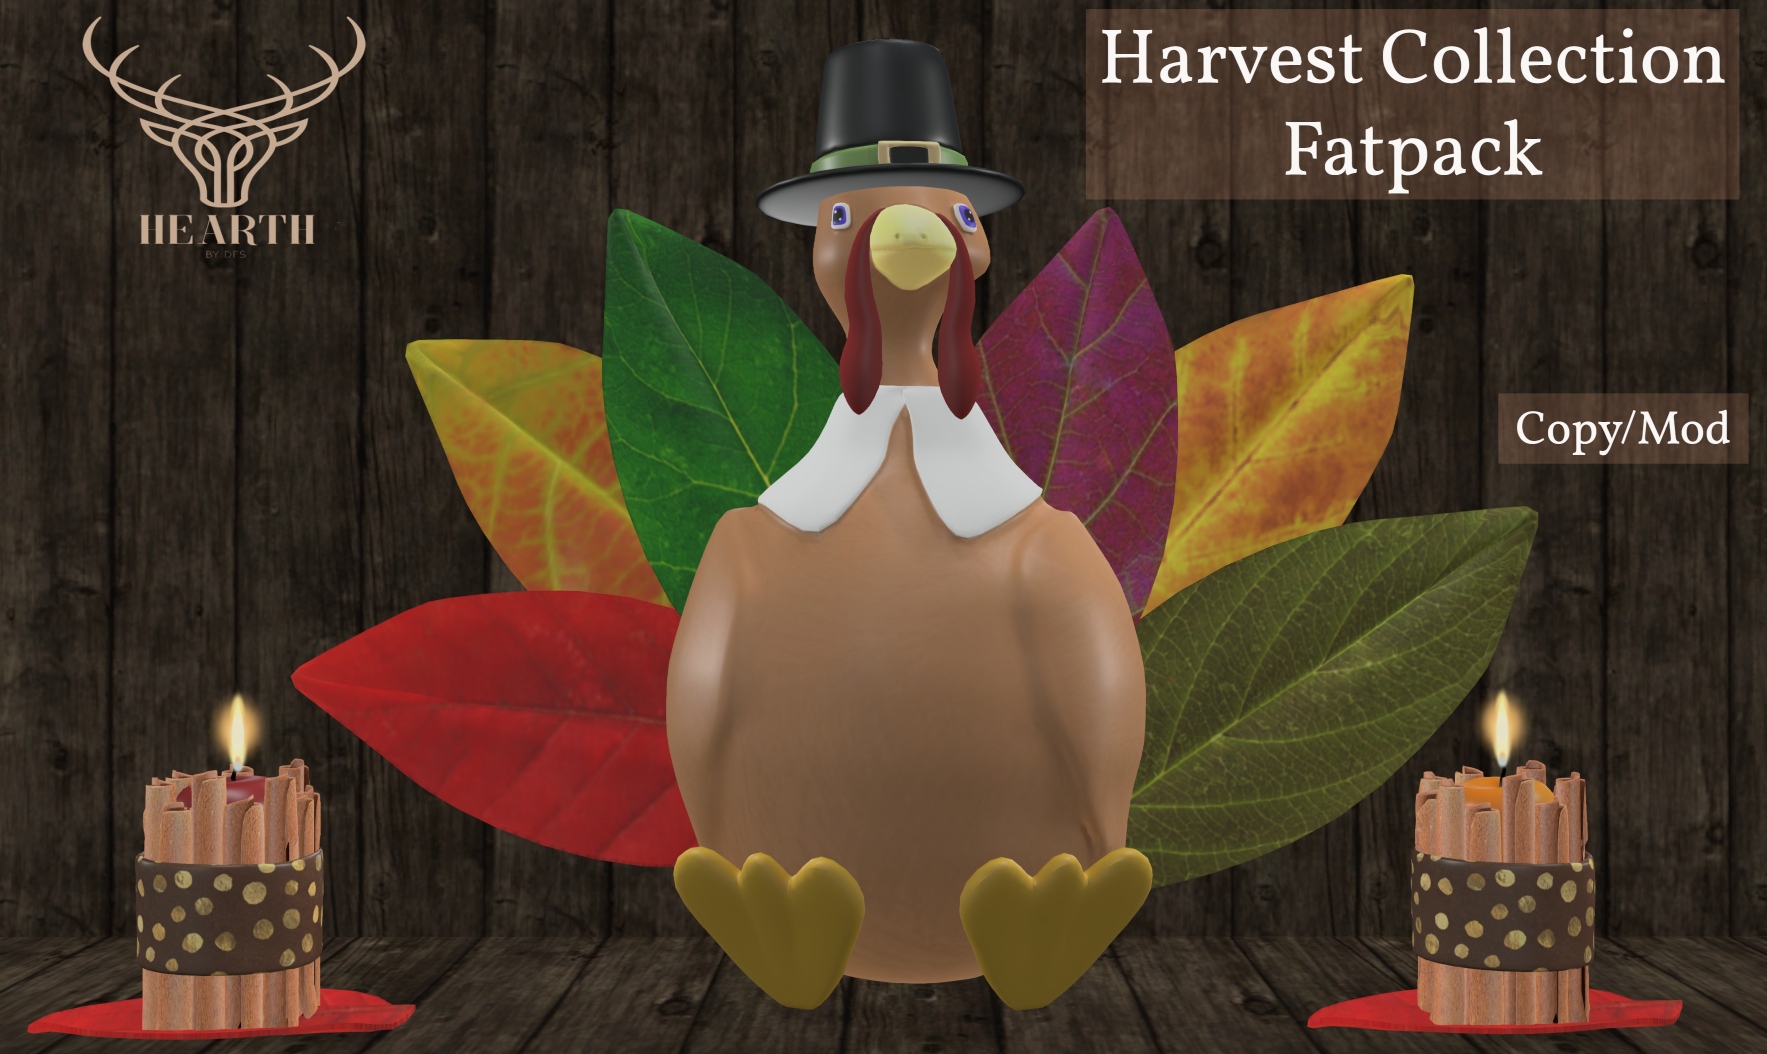 Hearth – Thankful Turkey Harvest Colors and Cinnamon Spice Candles